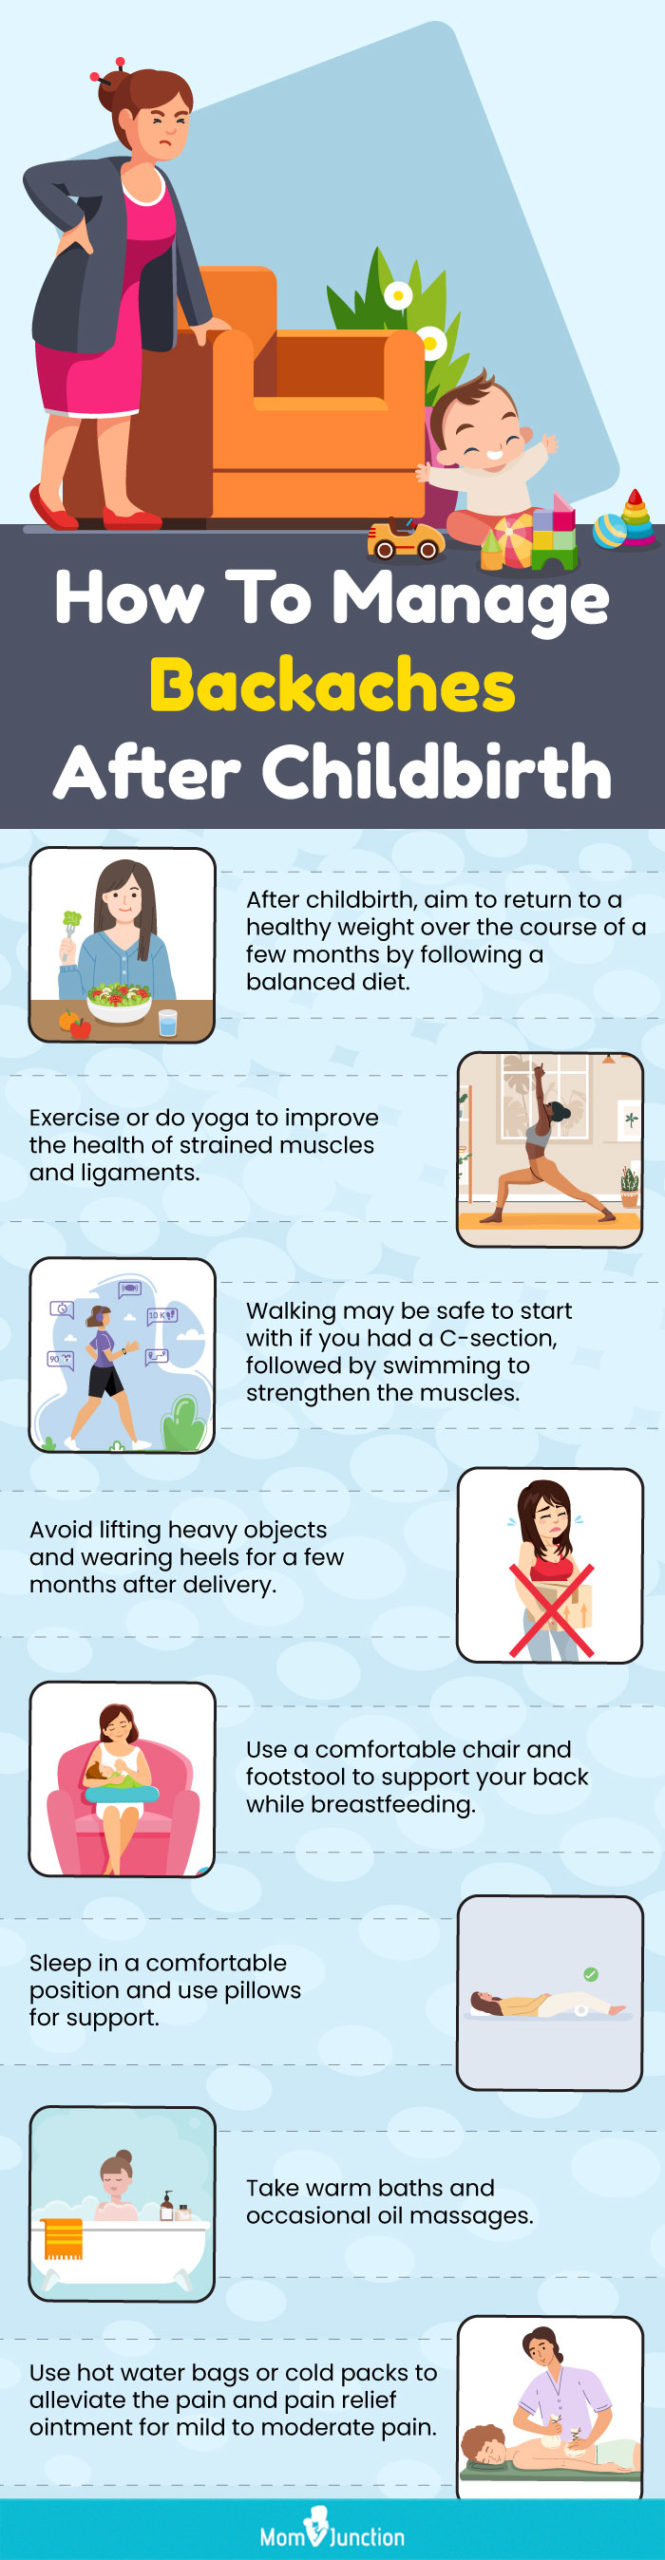 how to manage backaches after childbirth (infographic)